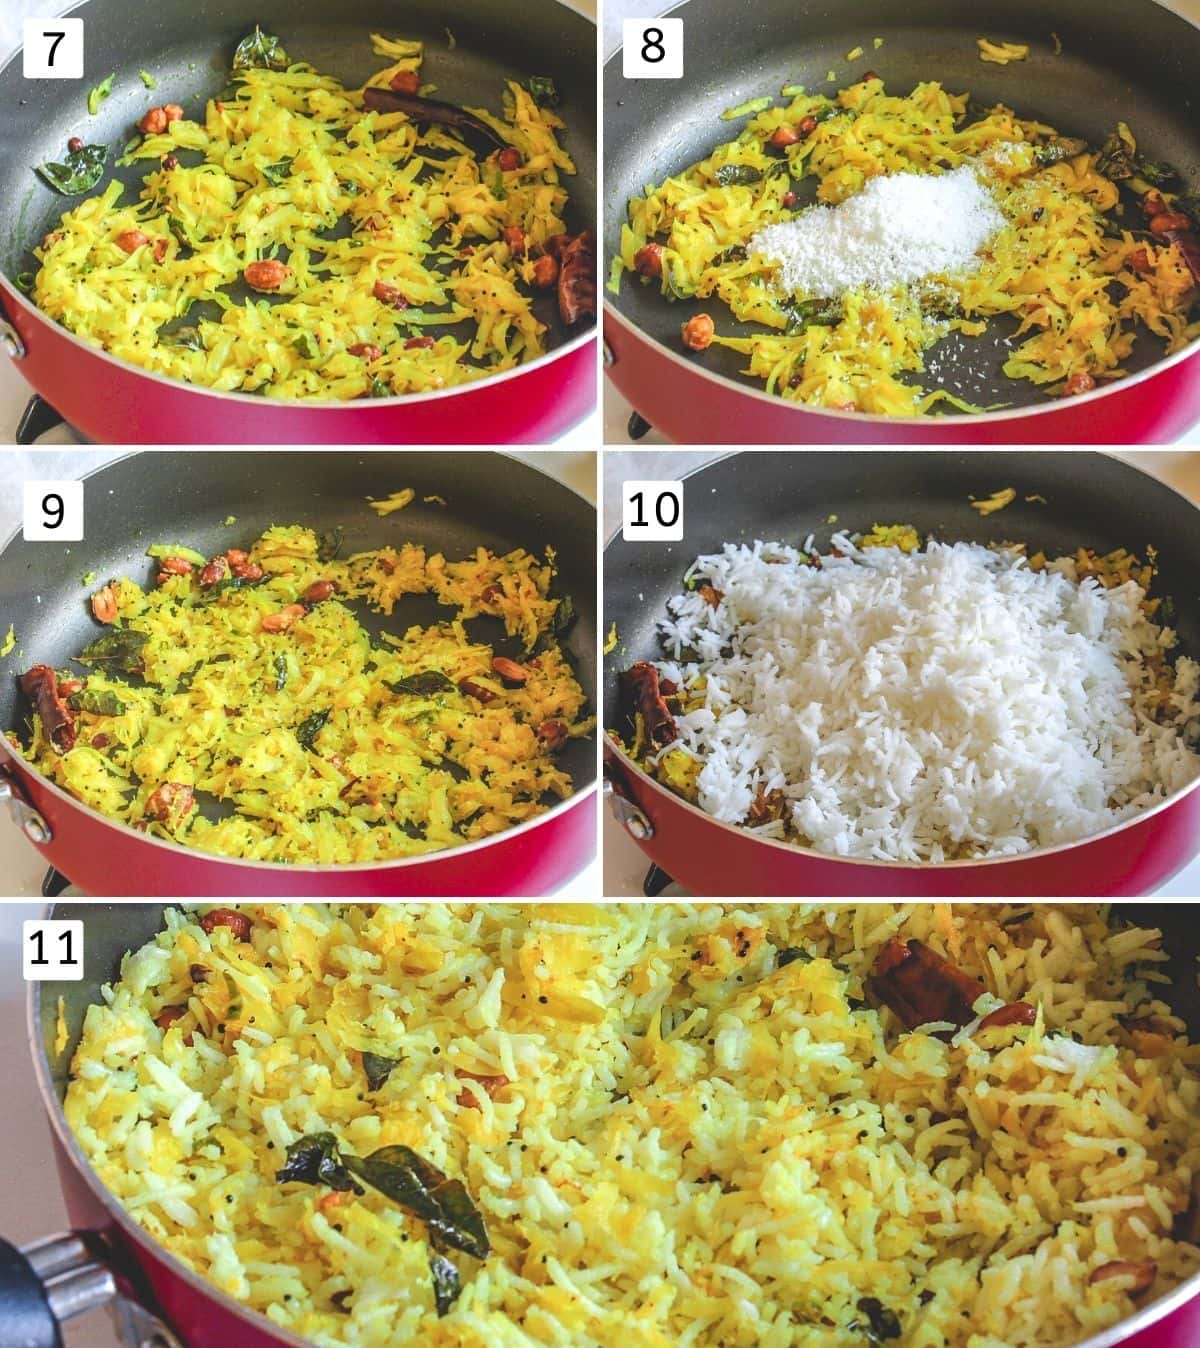 Collage of 6 images showing cooking grated mango with coconut, mixing in cooked rice.